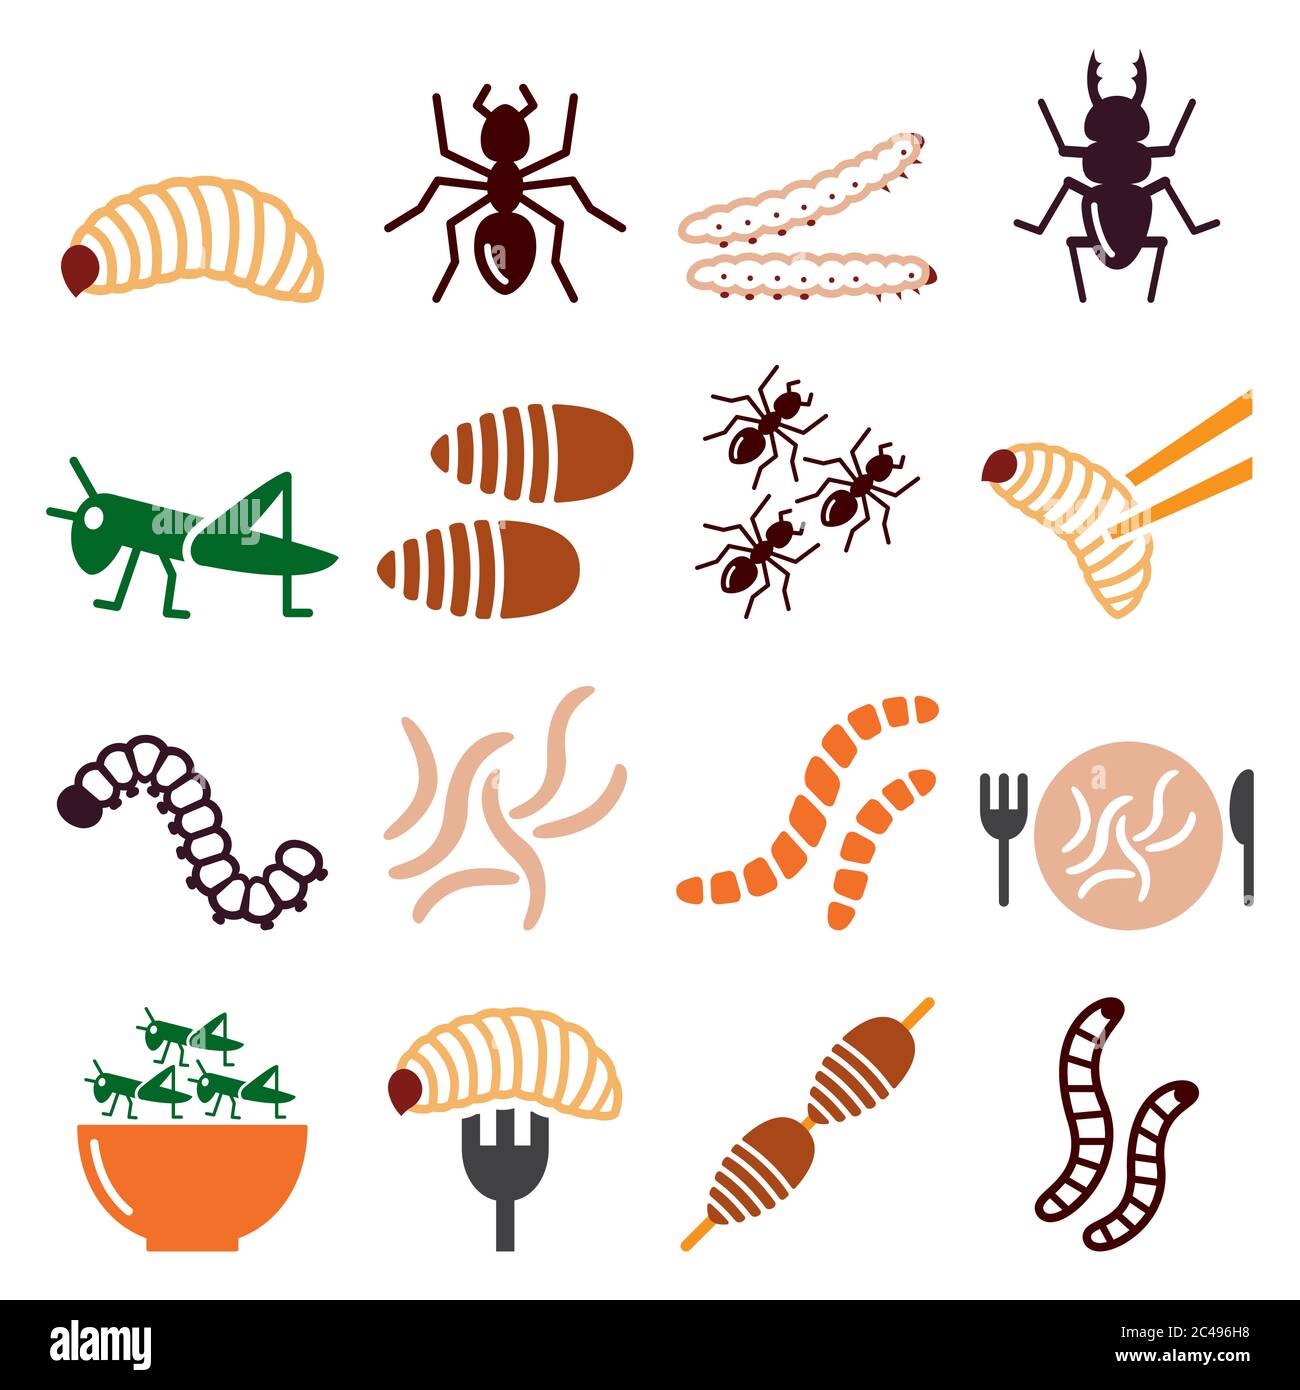 Edible worms and insects vector icons set - alternative source on protein in food Stock Vector